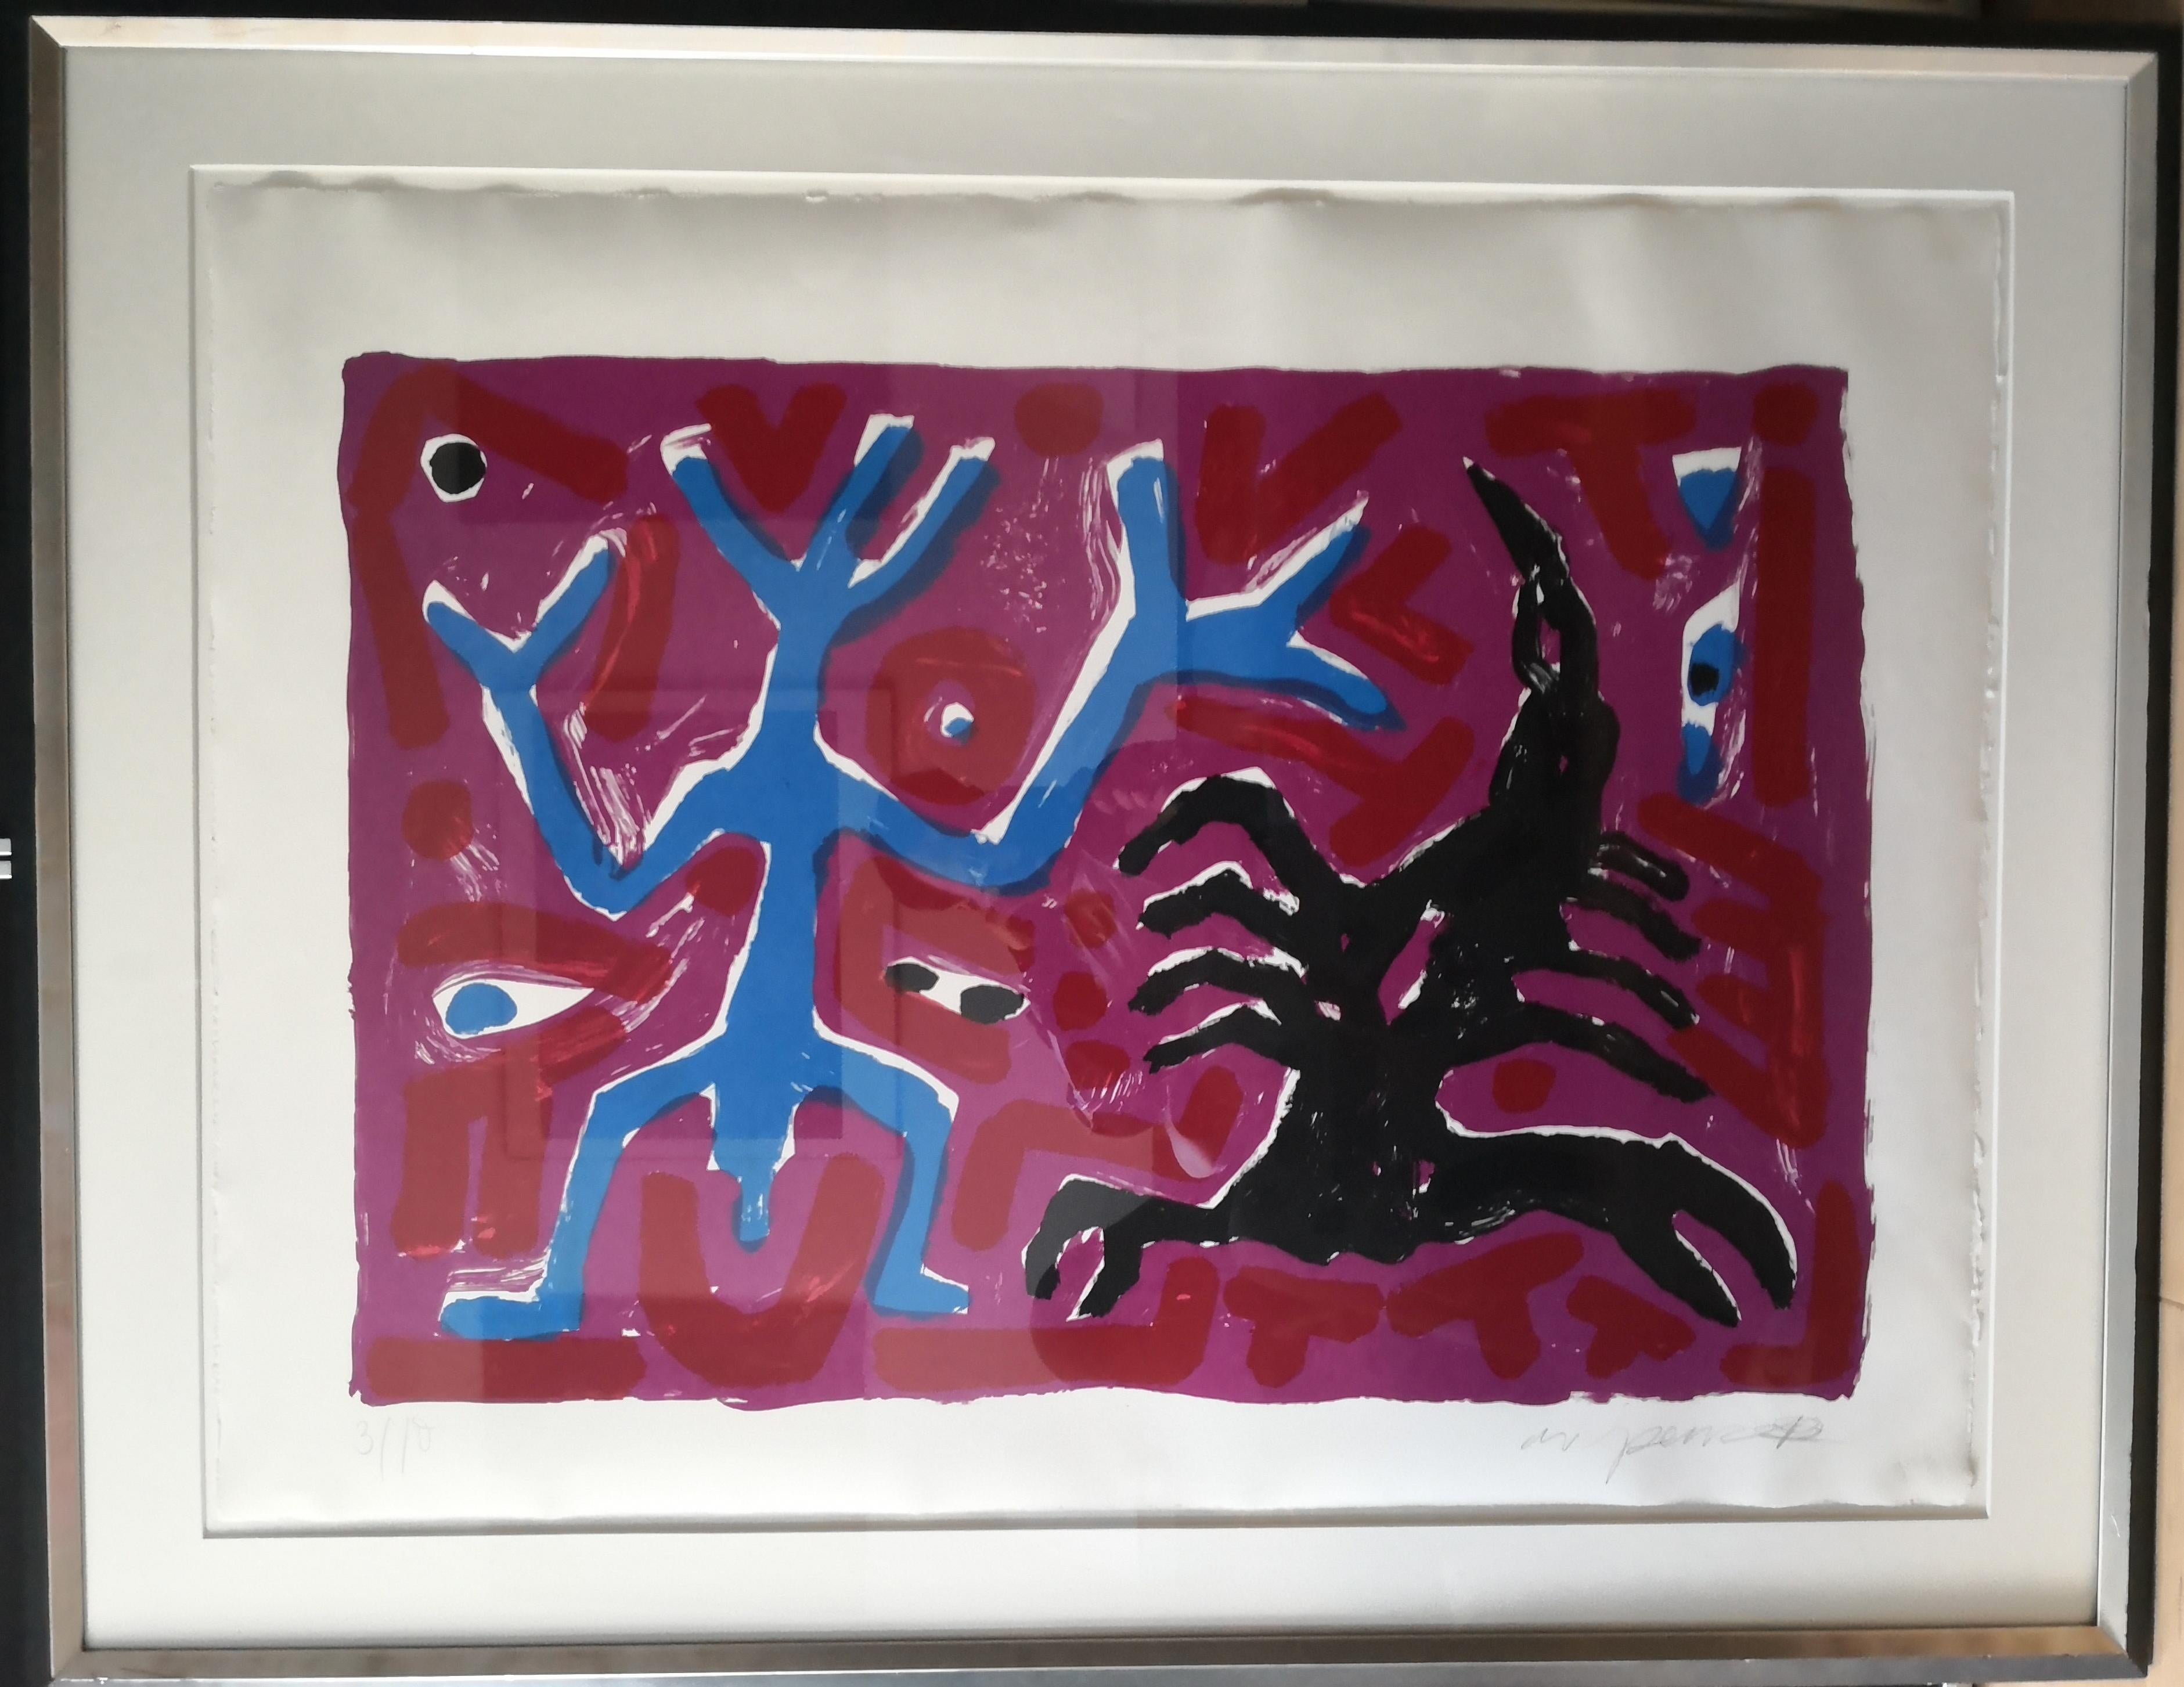 Skorpion - Scorpio 

By A.R. Penck

A.R. Penck, born Ralf Winkler in Dresden, Germany, in 1939, was a trailblazing artist who made indelible contributions to the Neo-Expressionist movement. Penck's art is a visceral exploration of primal